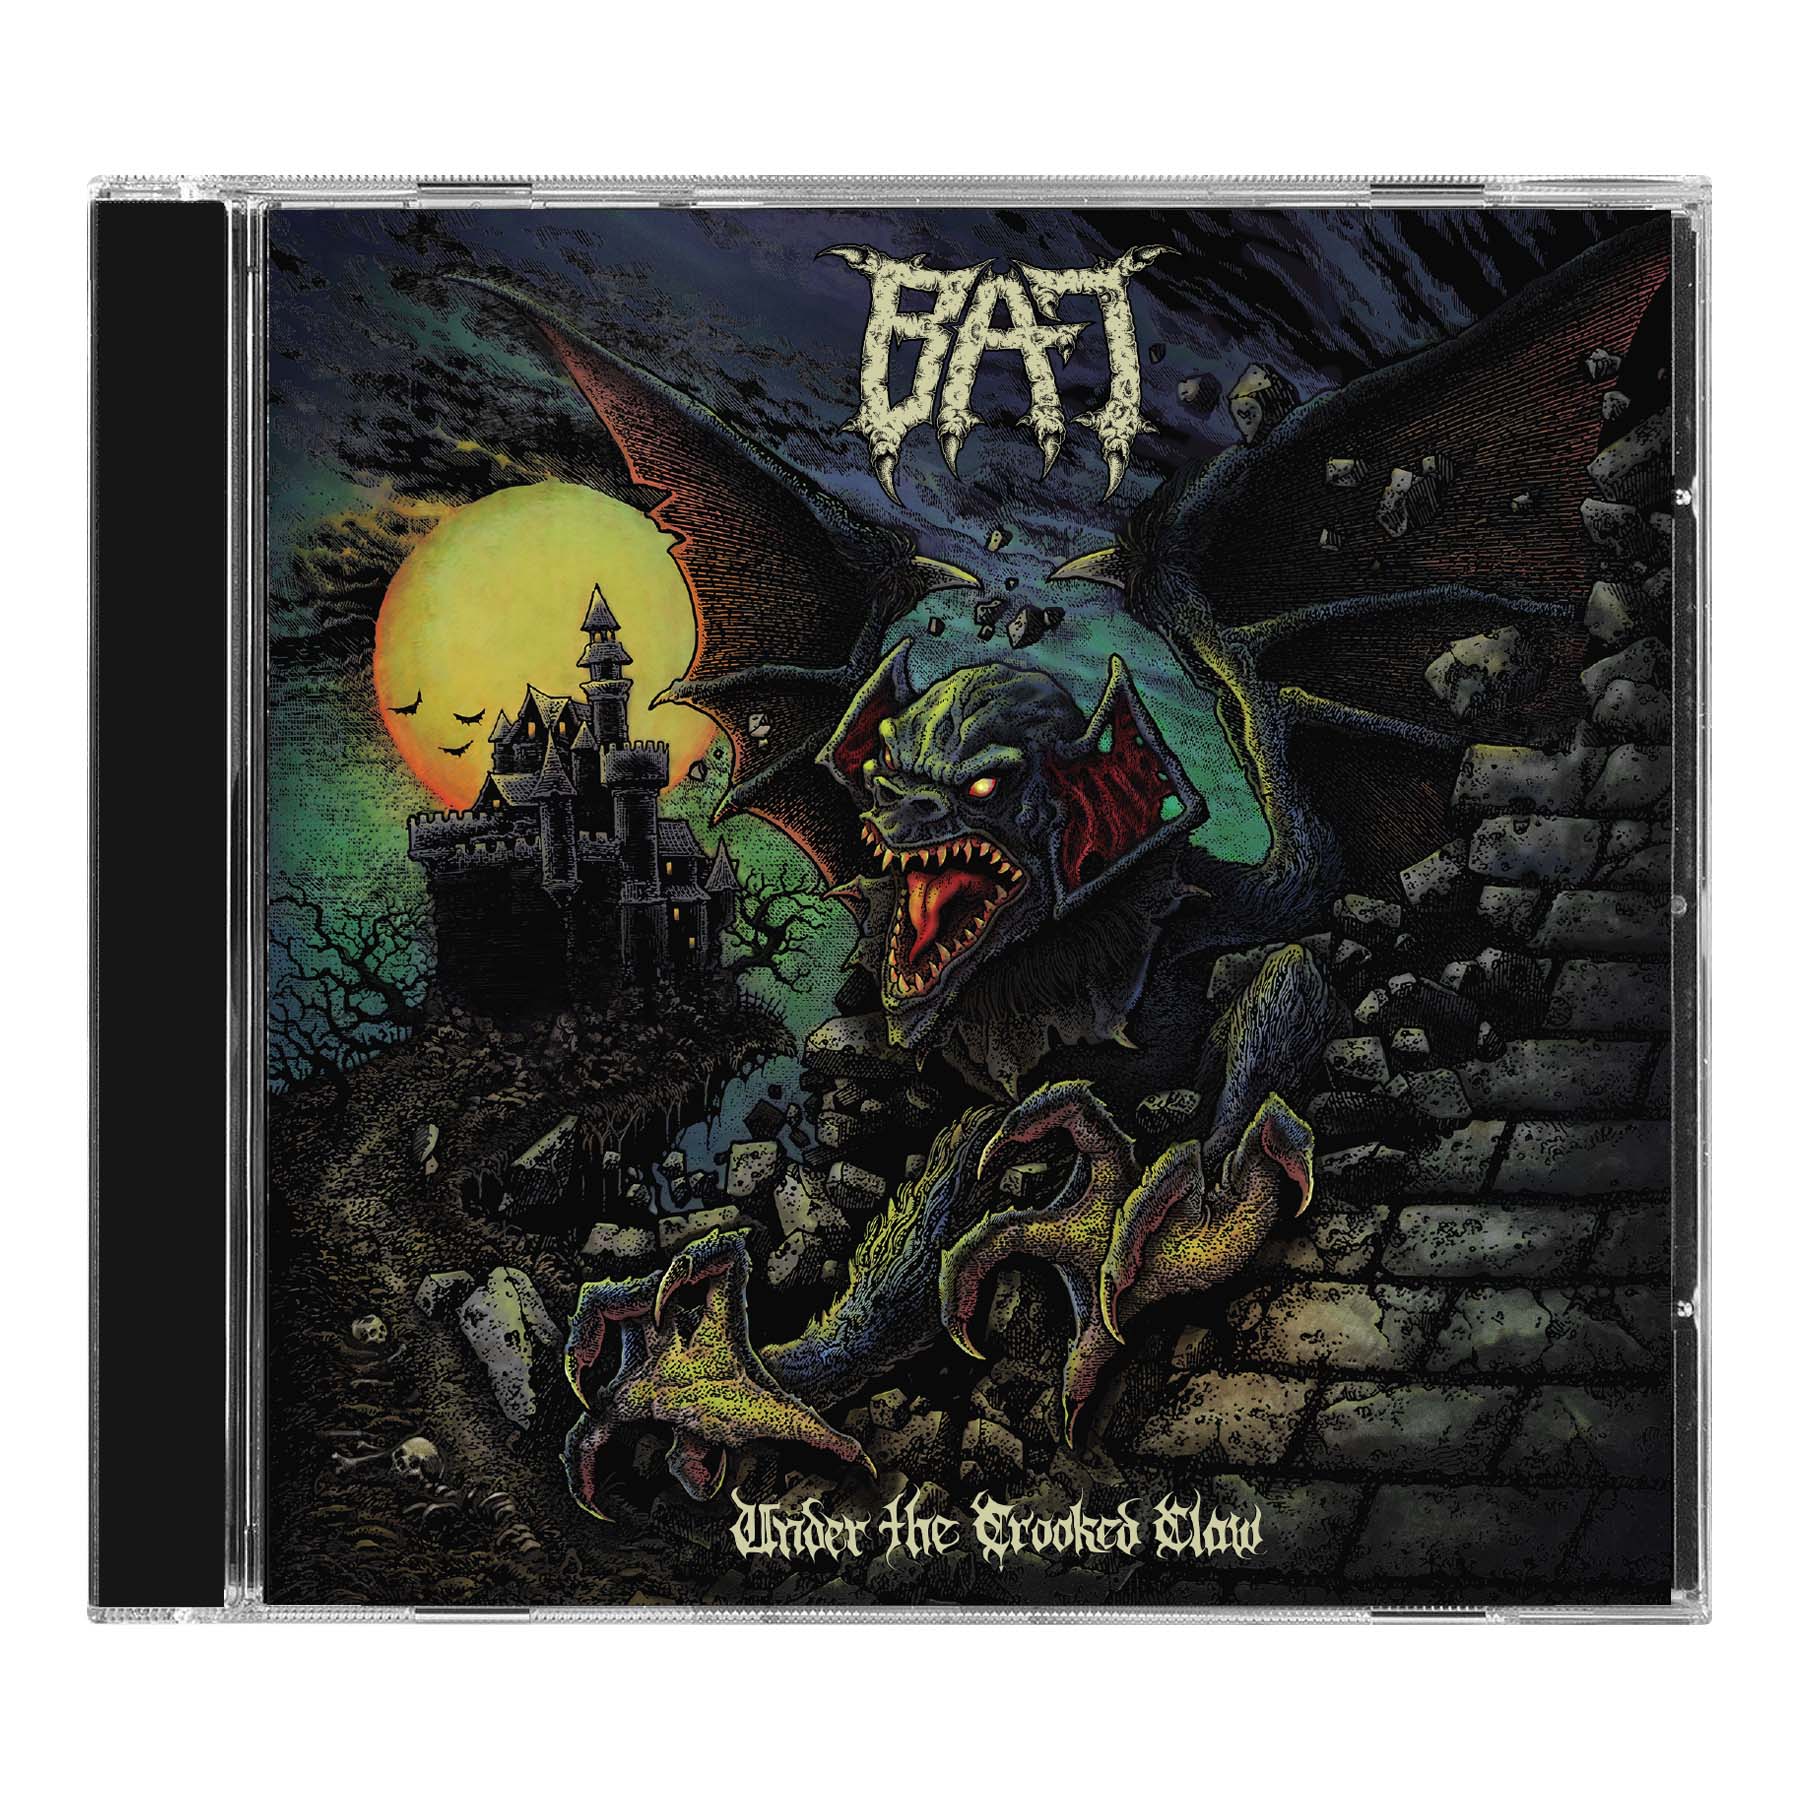 BAT "Under The Crooked Claw" CD